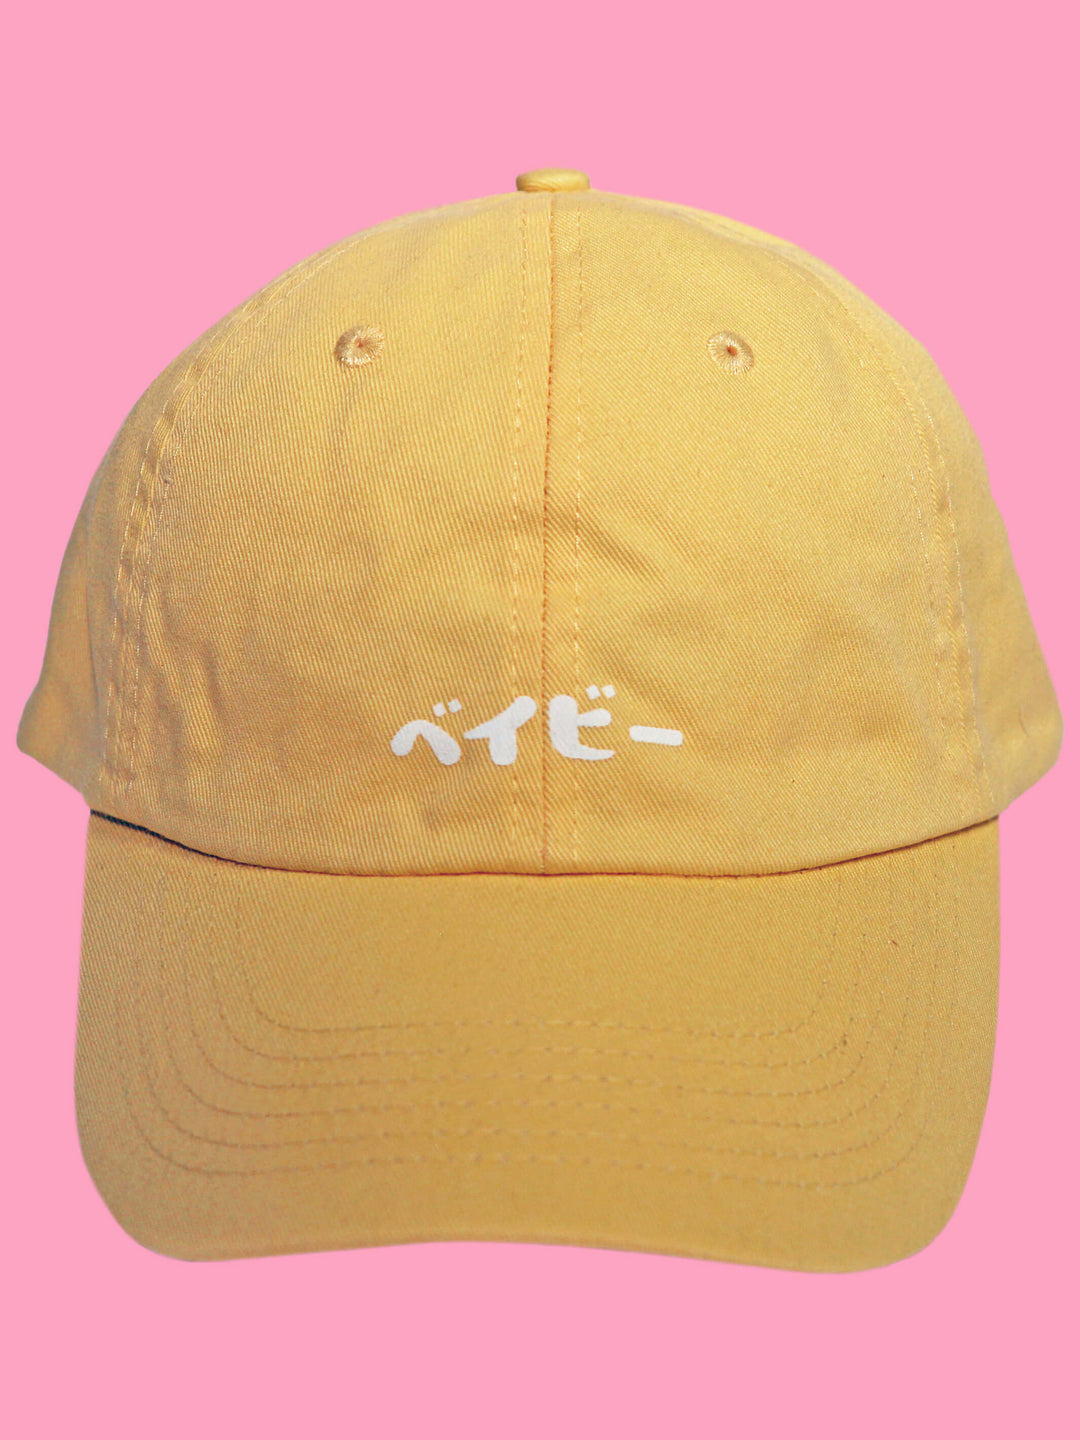 Pastel yellow dad cap that reads 'Baby' in Japanese.